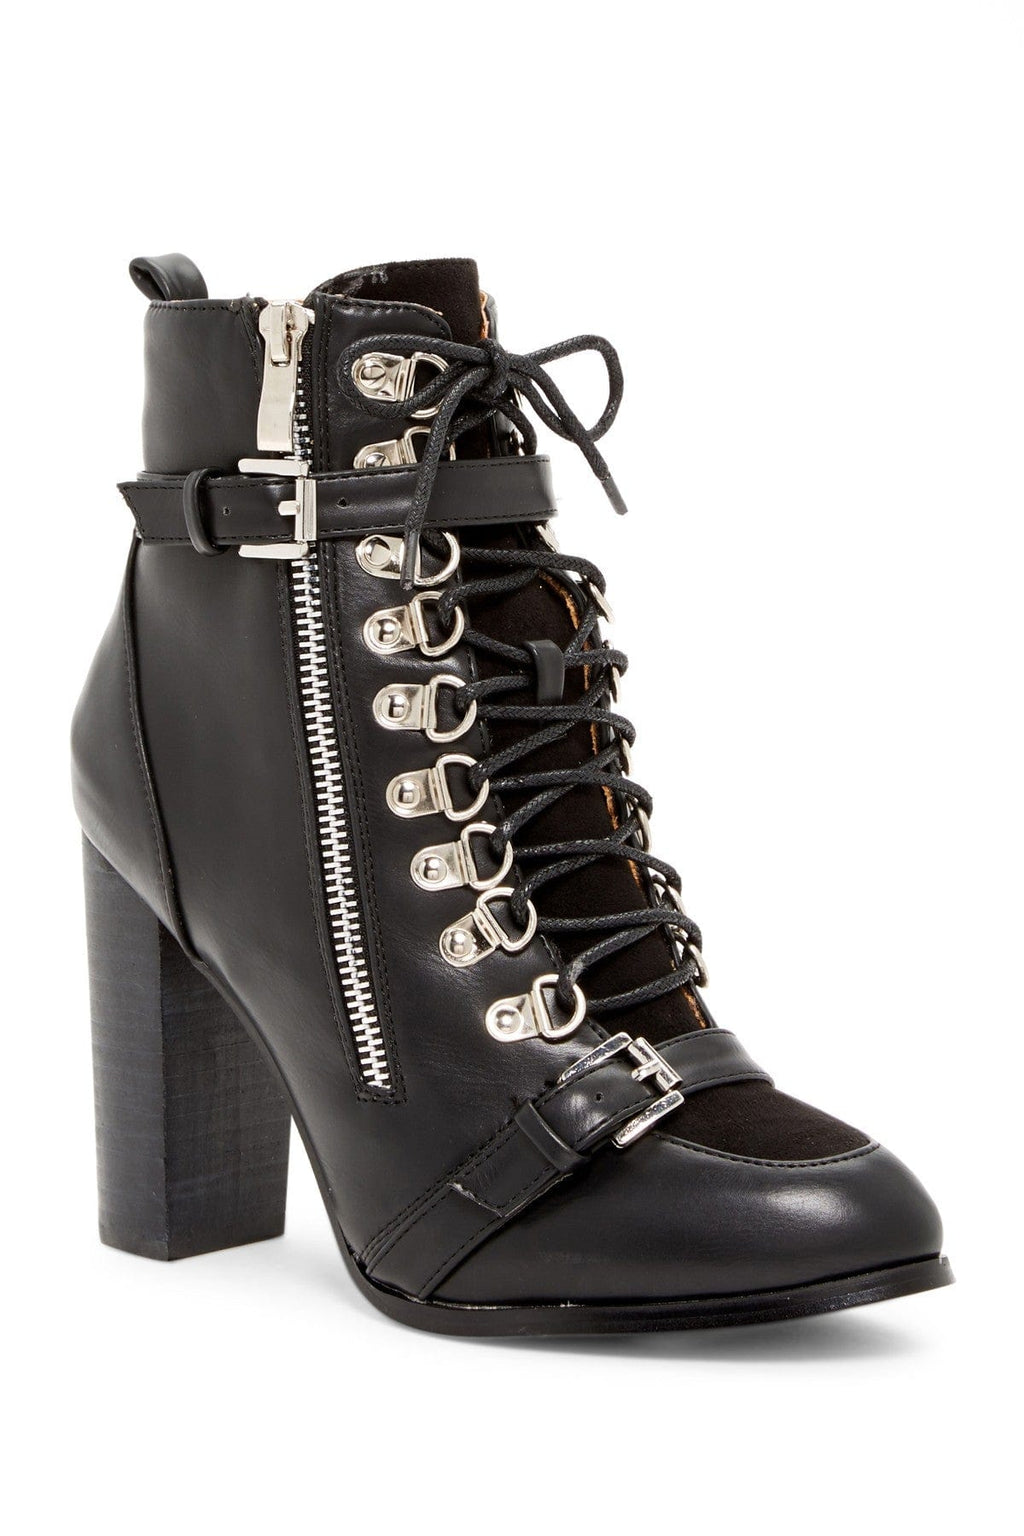 N.Y.L.A. SHOES BOOTIES N.Y.L.A. Shoes OLYGTORY Women's Vegan Leather Lace Up Black Botties with 4" Heel